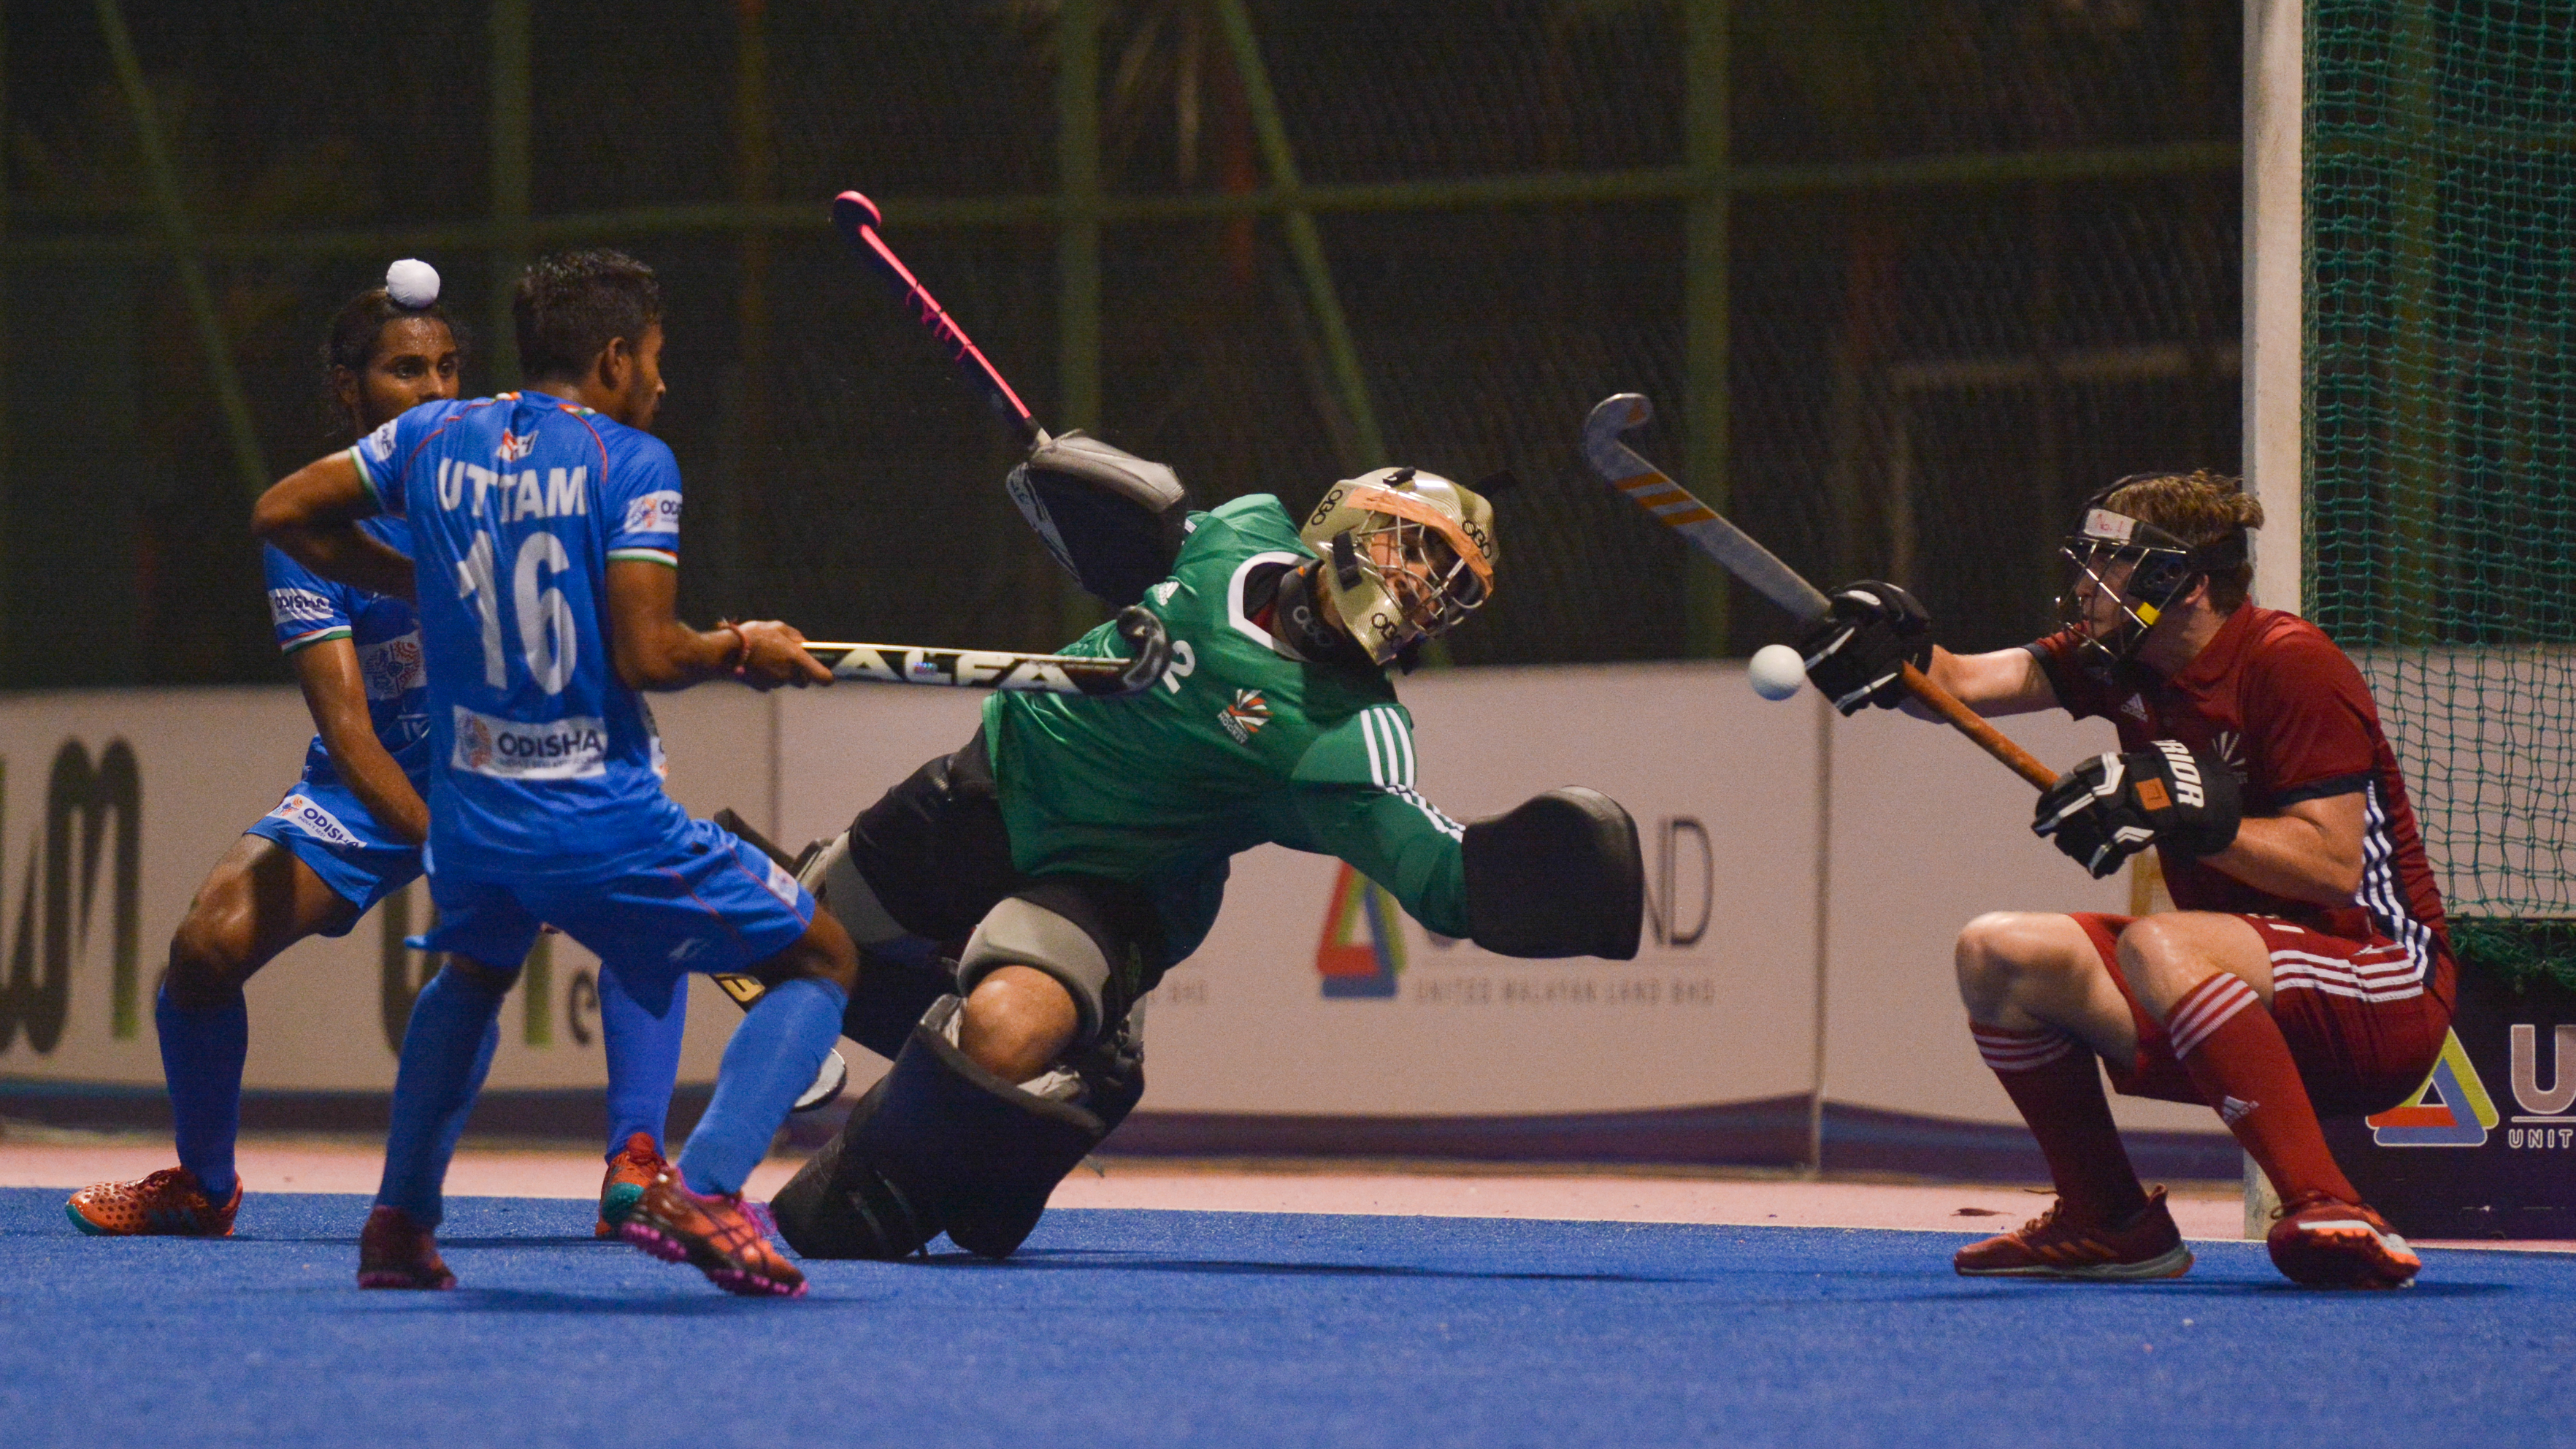 Sultan of Johor Cup | Stuart Rushmere’s brace helps Great Britain defeat India in nail-biting final